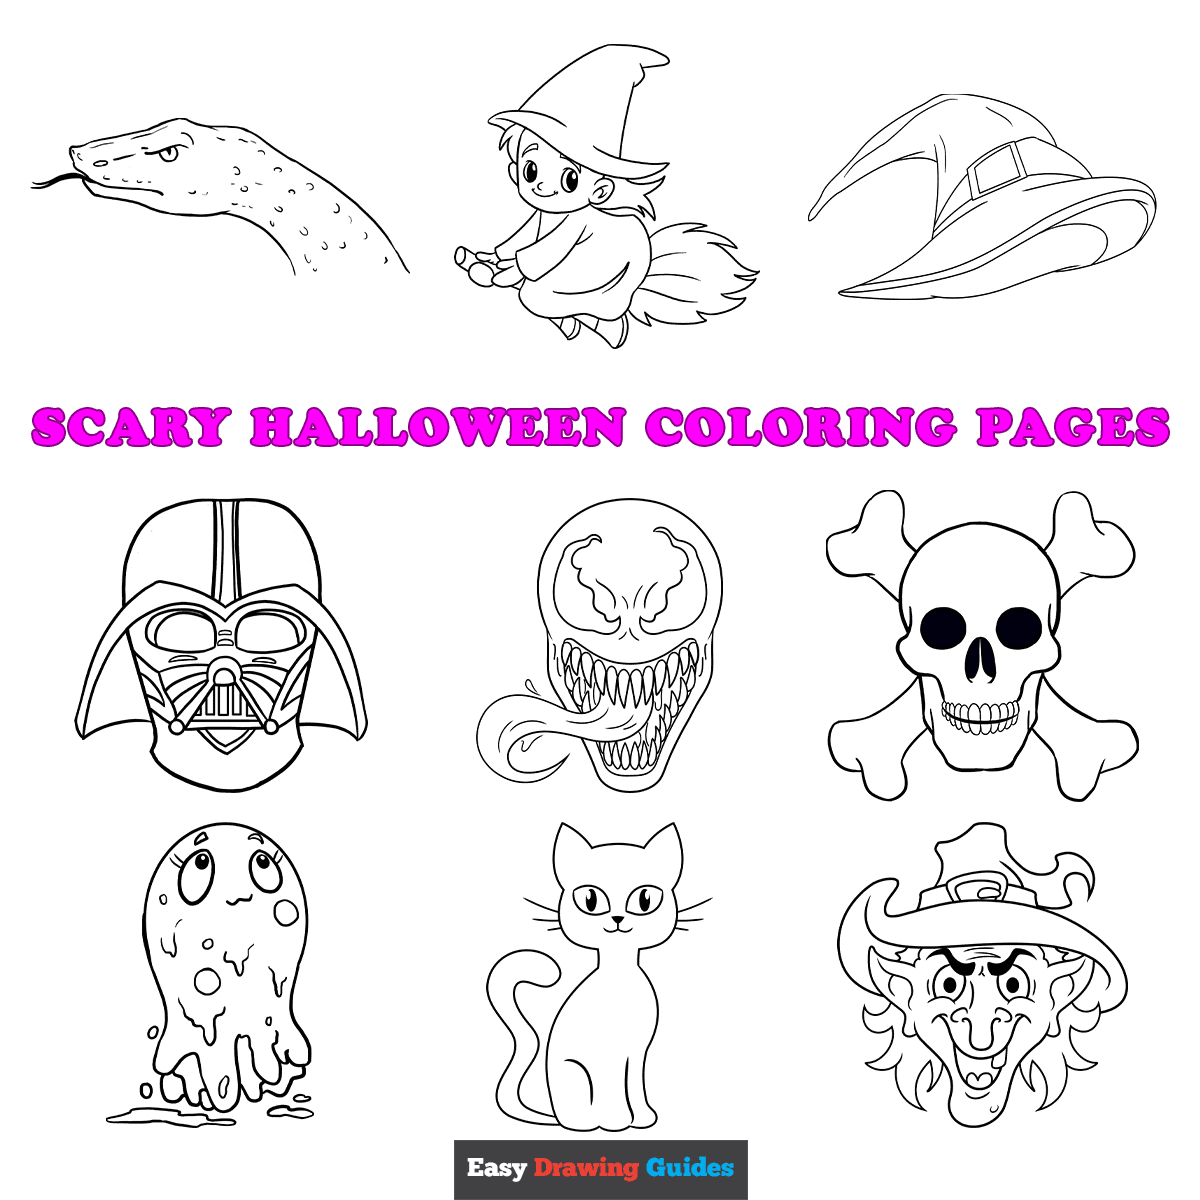 Halloween drawings easy drawing guides